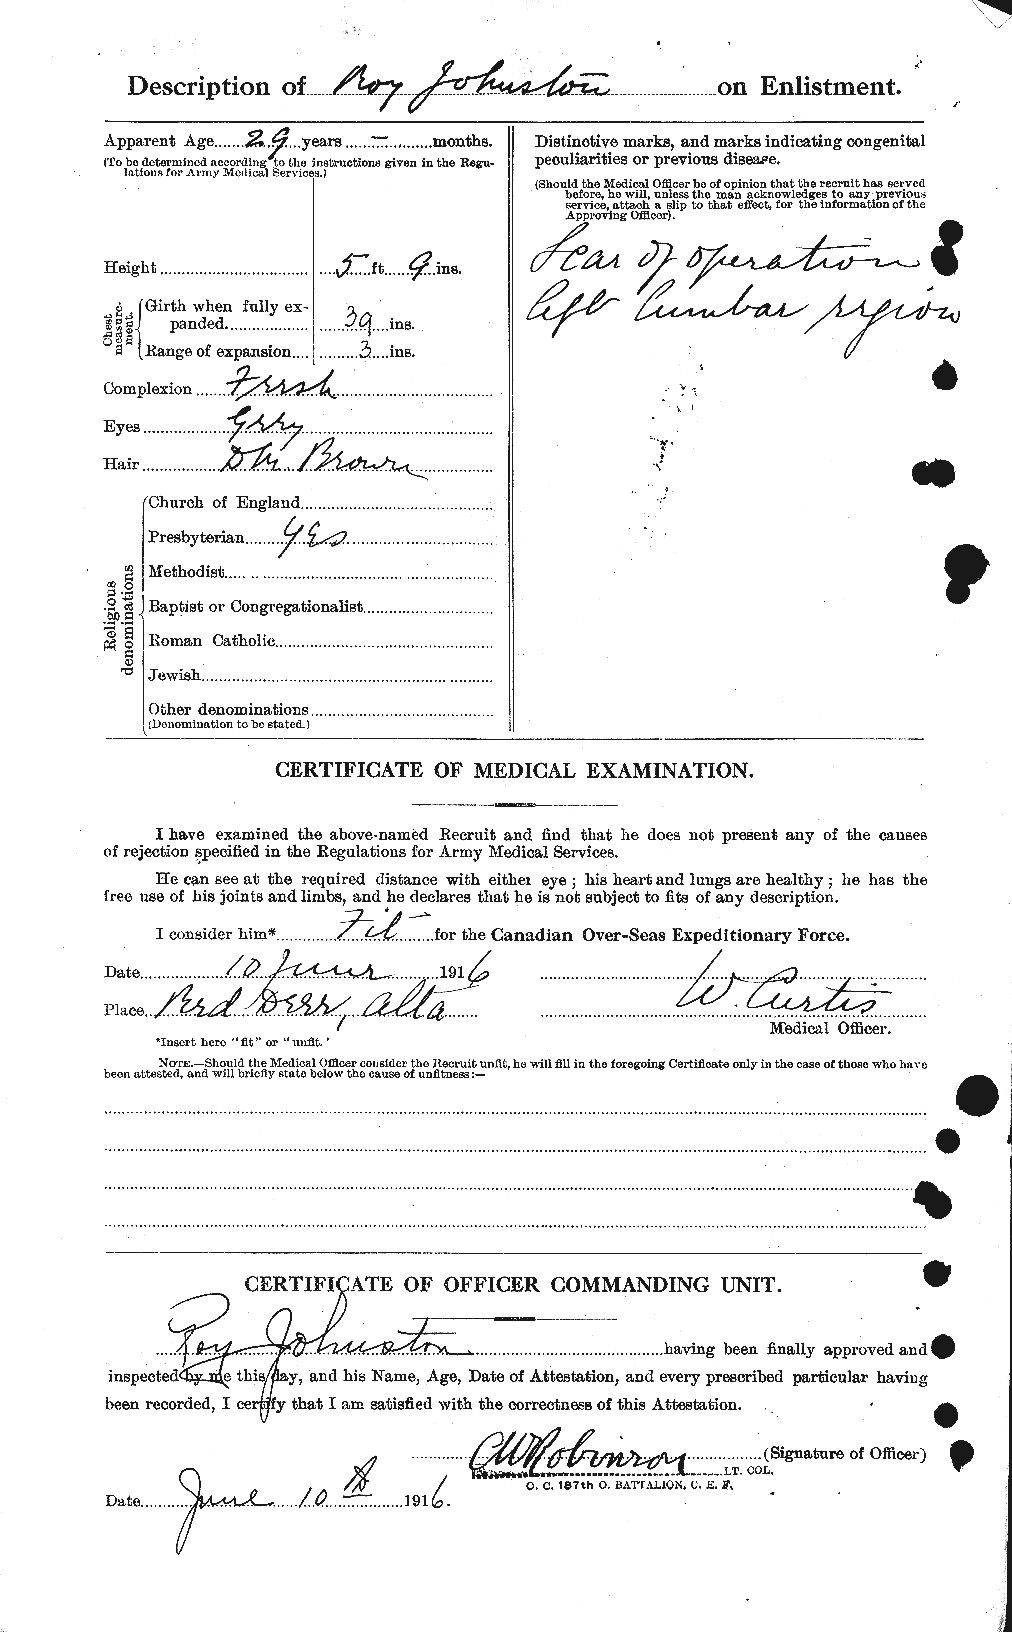 Personnel Records of the First World War - CEF 427057b